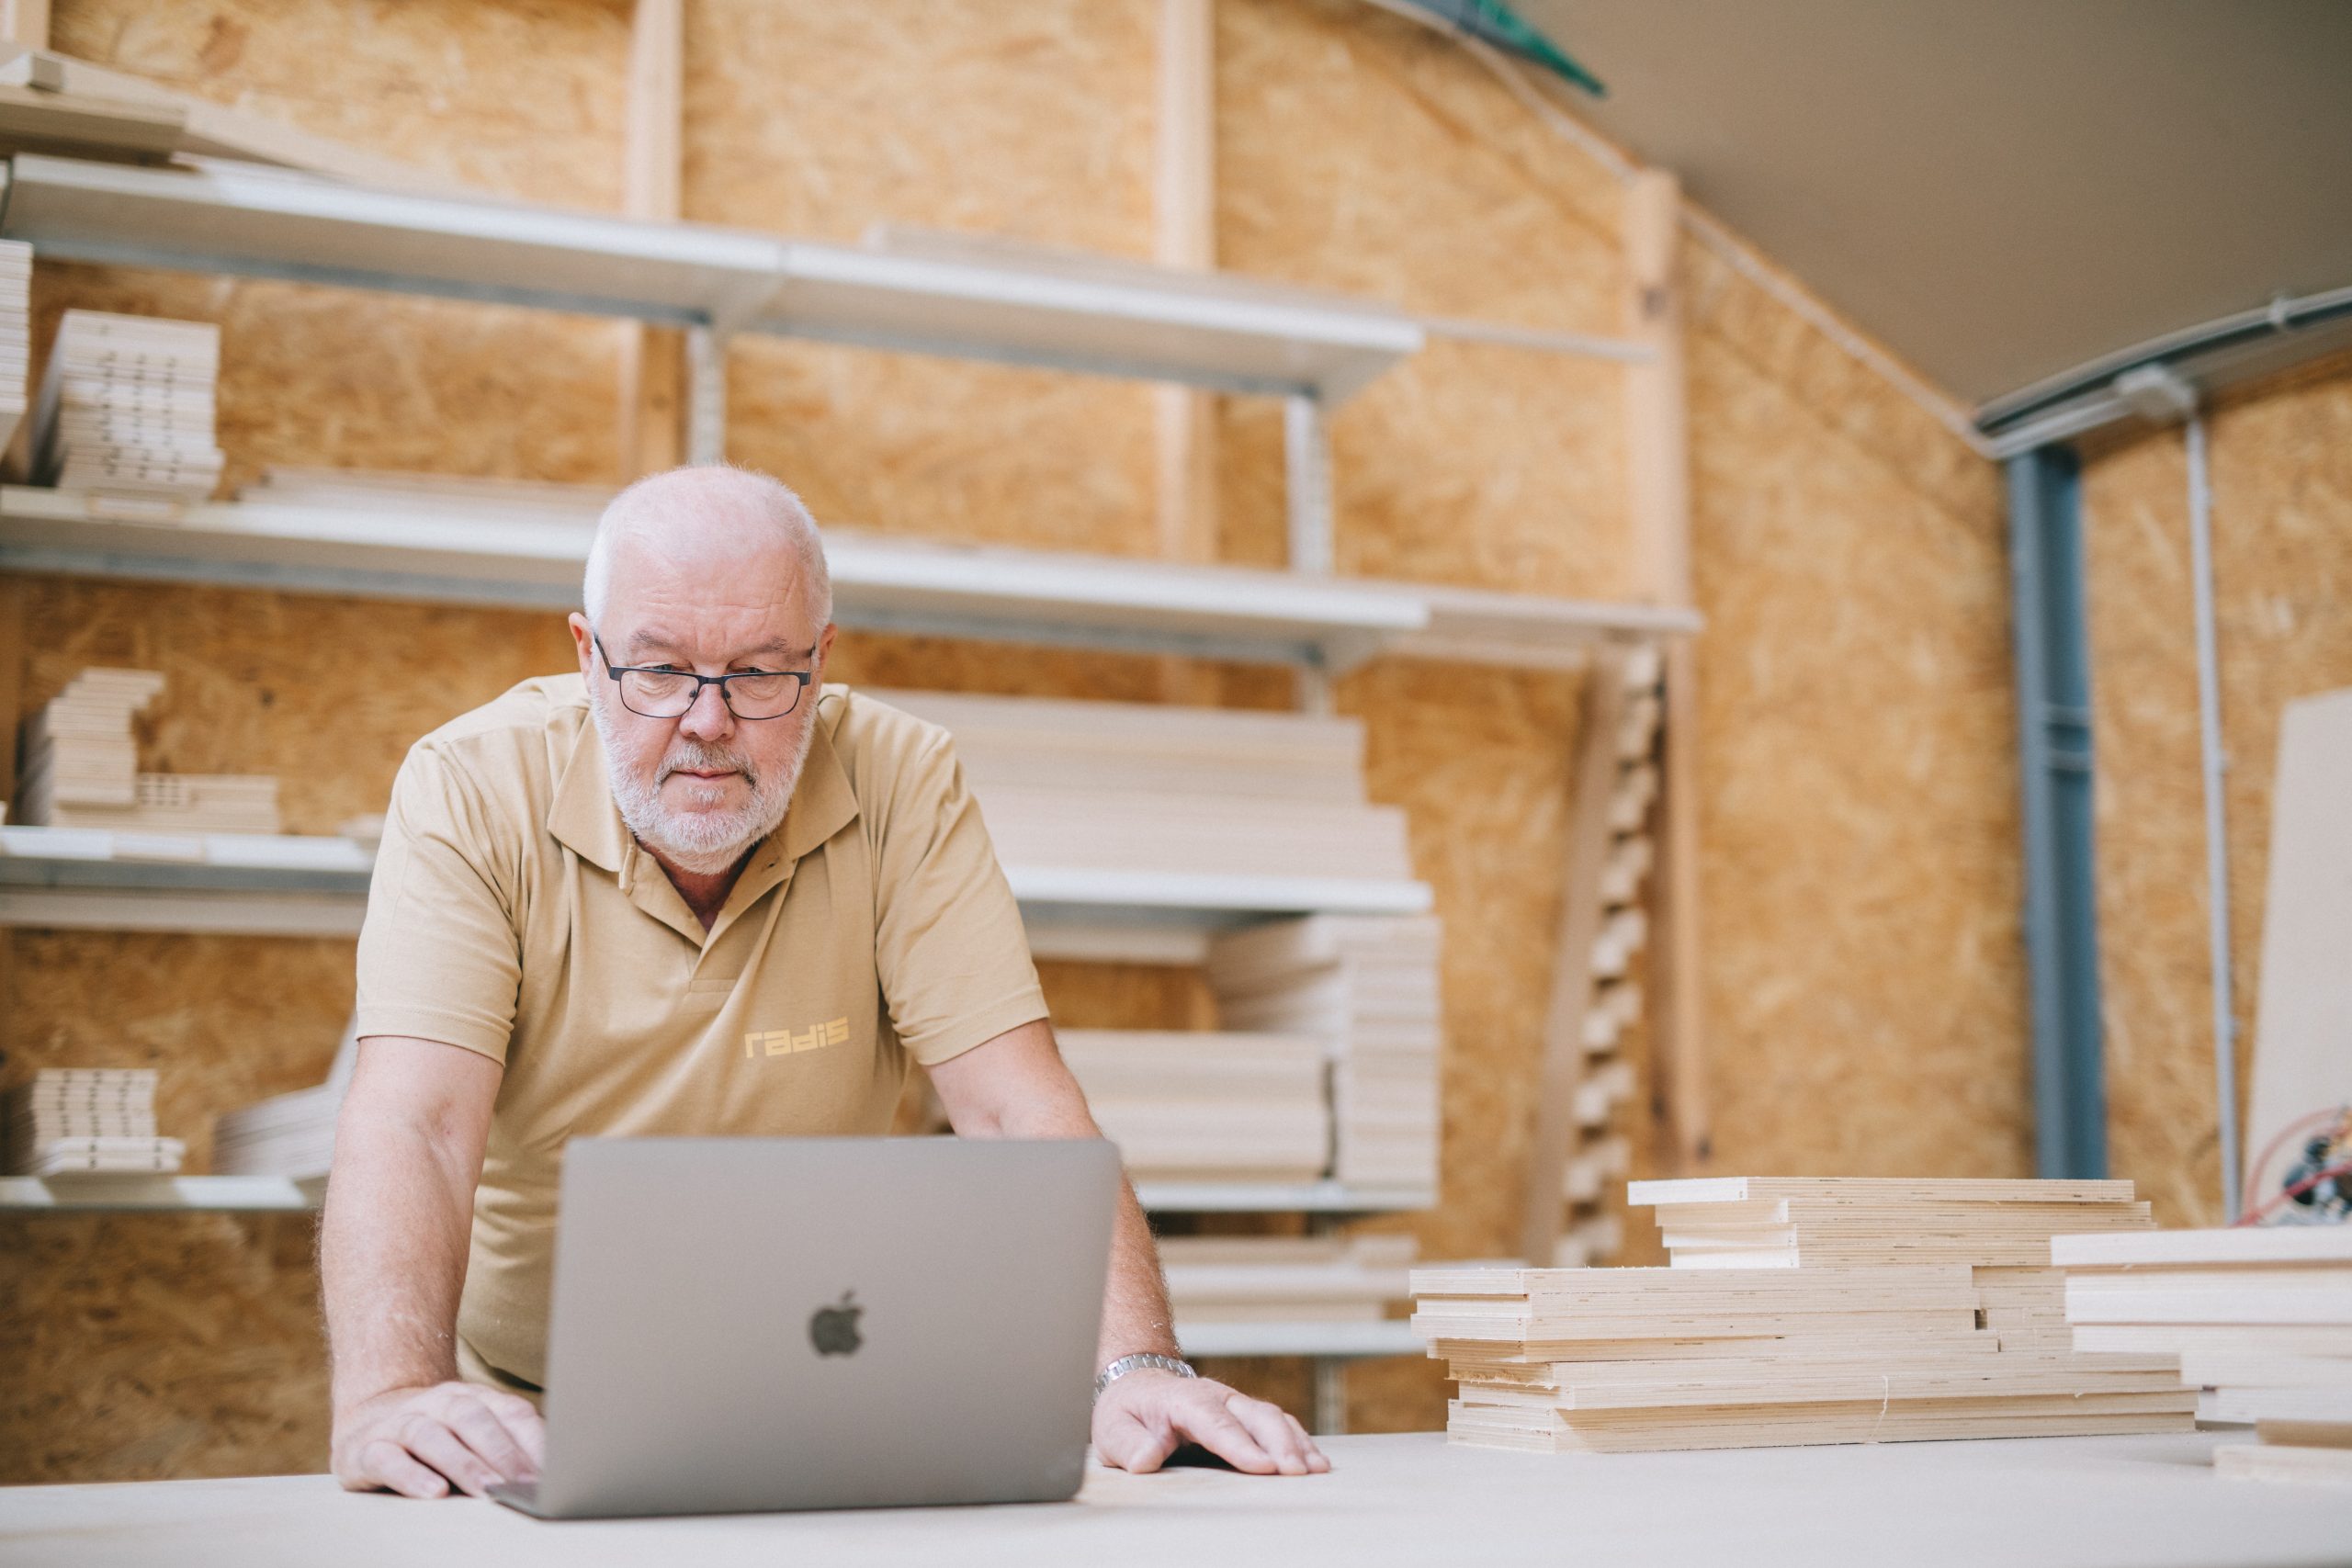 A worker in a beige polo shirt standing in a wood workshop looking at a laptop